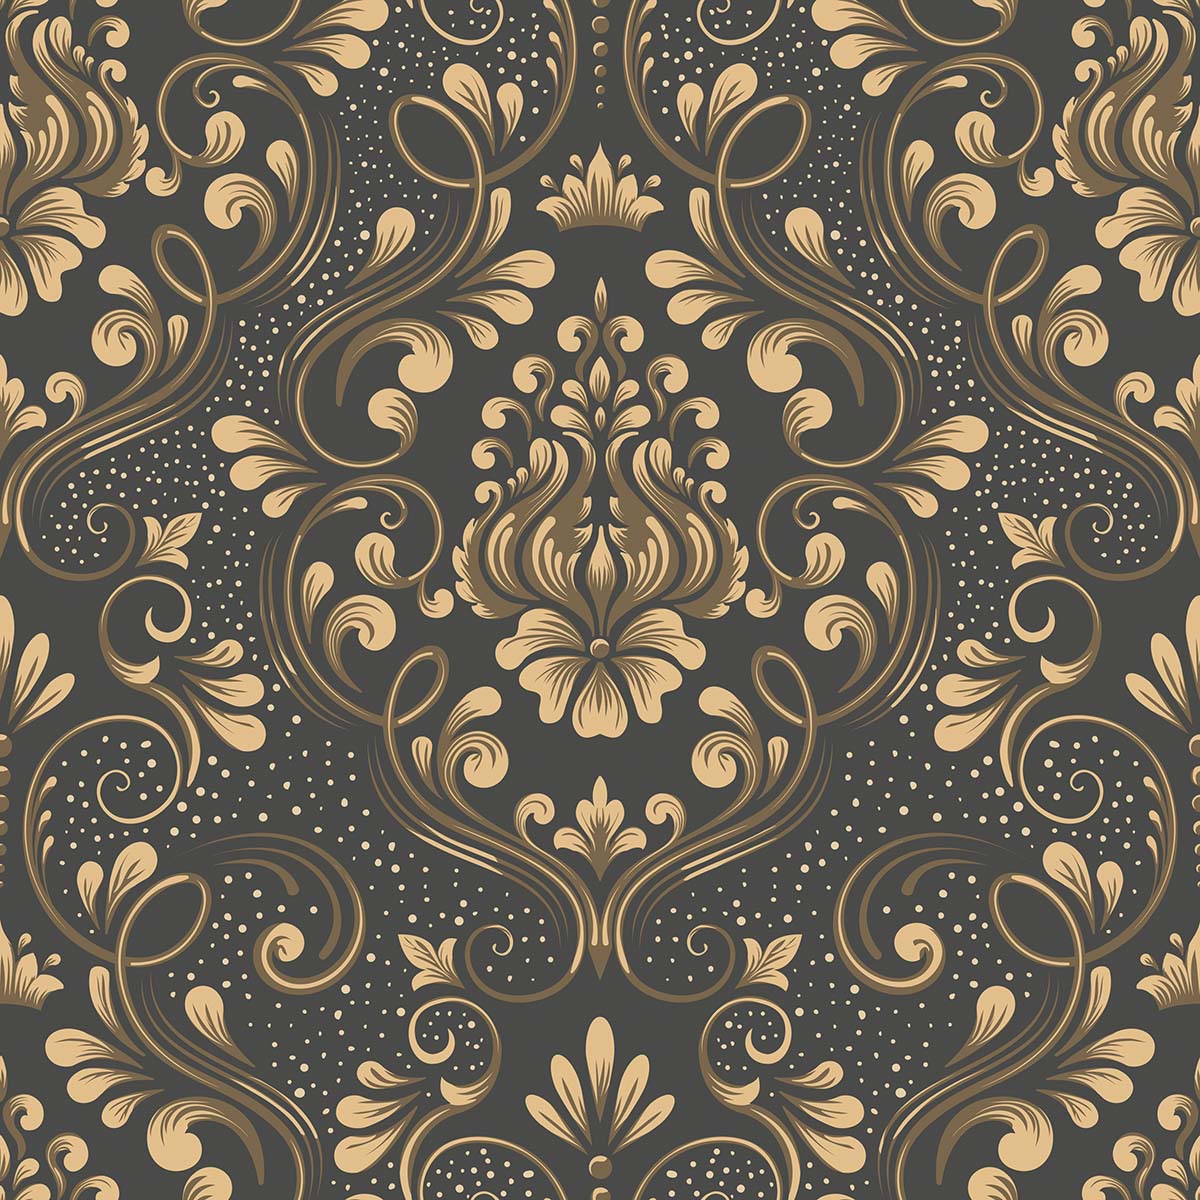 A wallpaper with gold and black designs